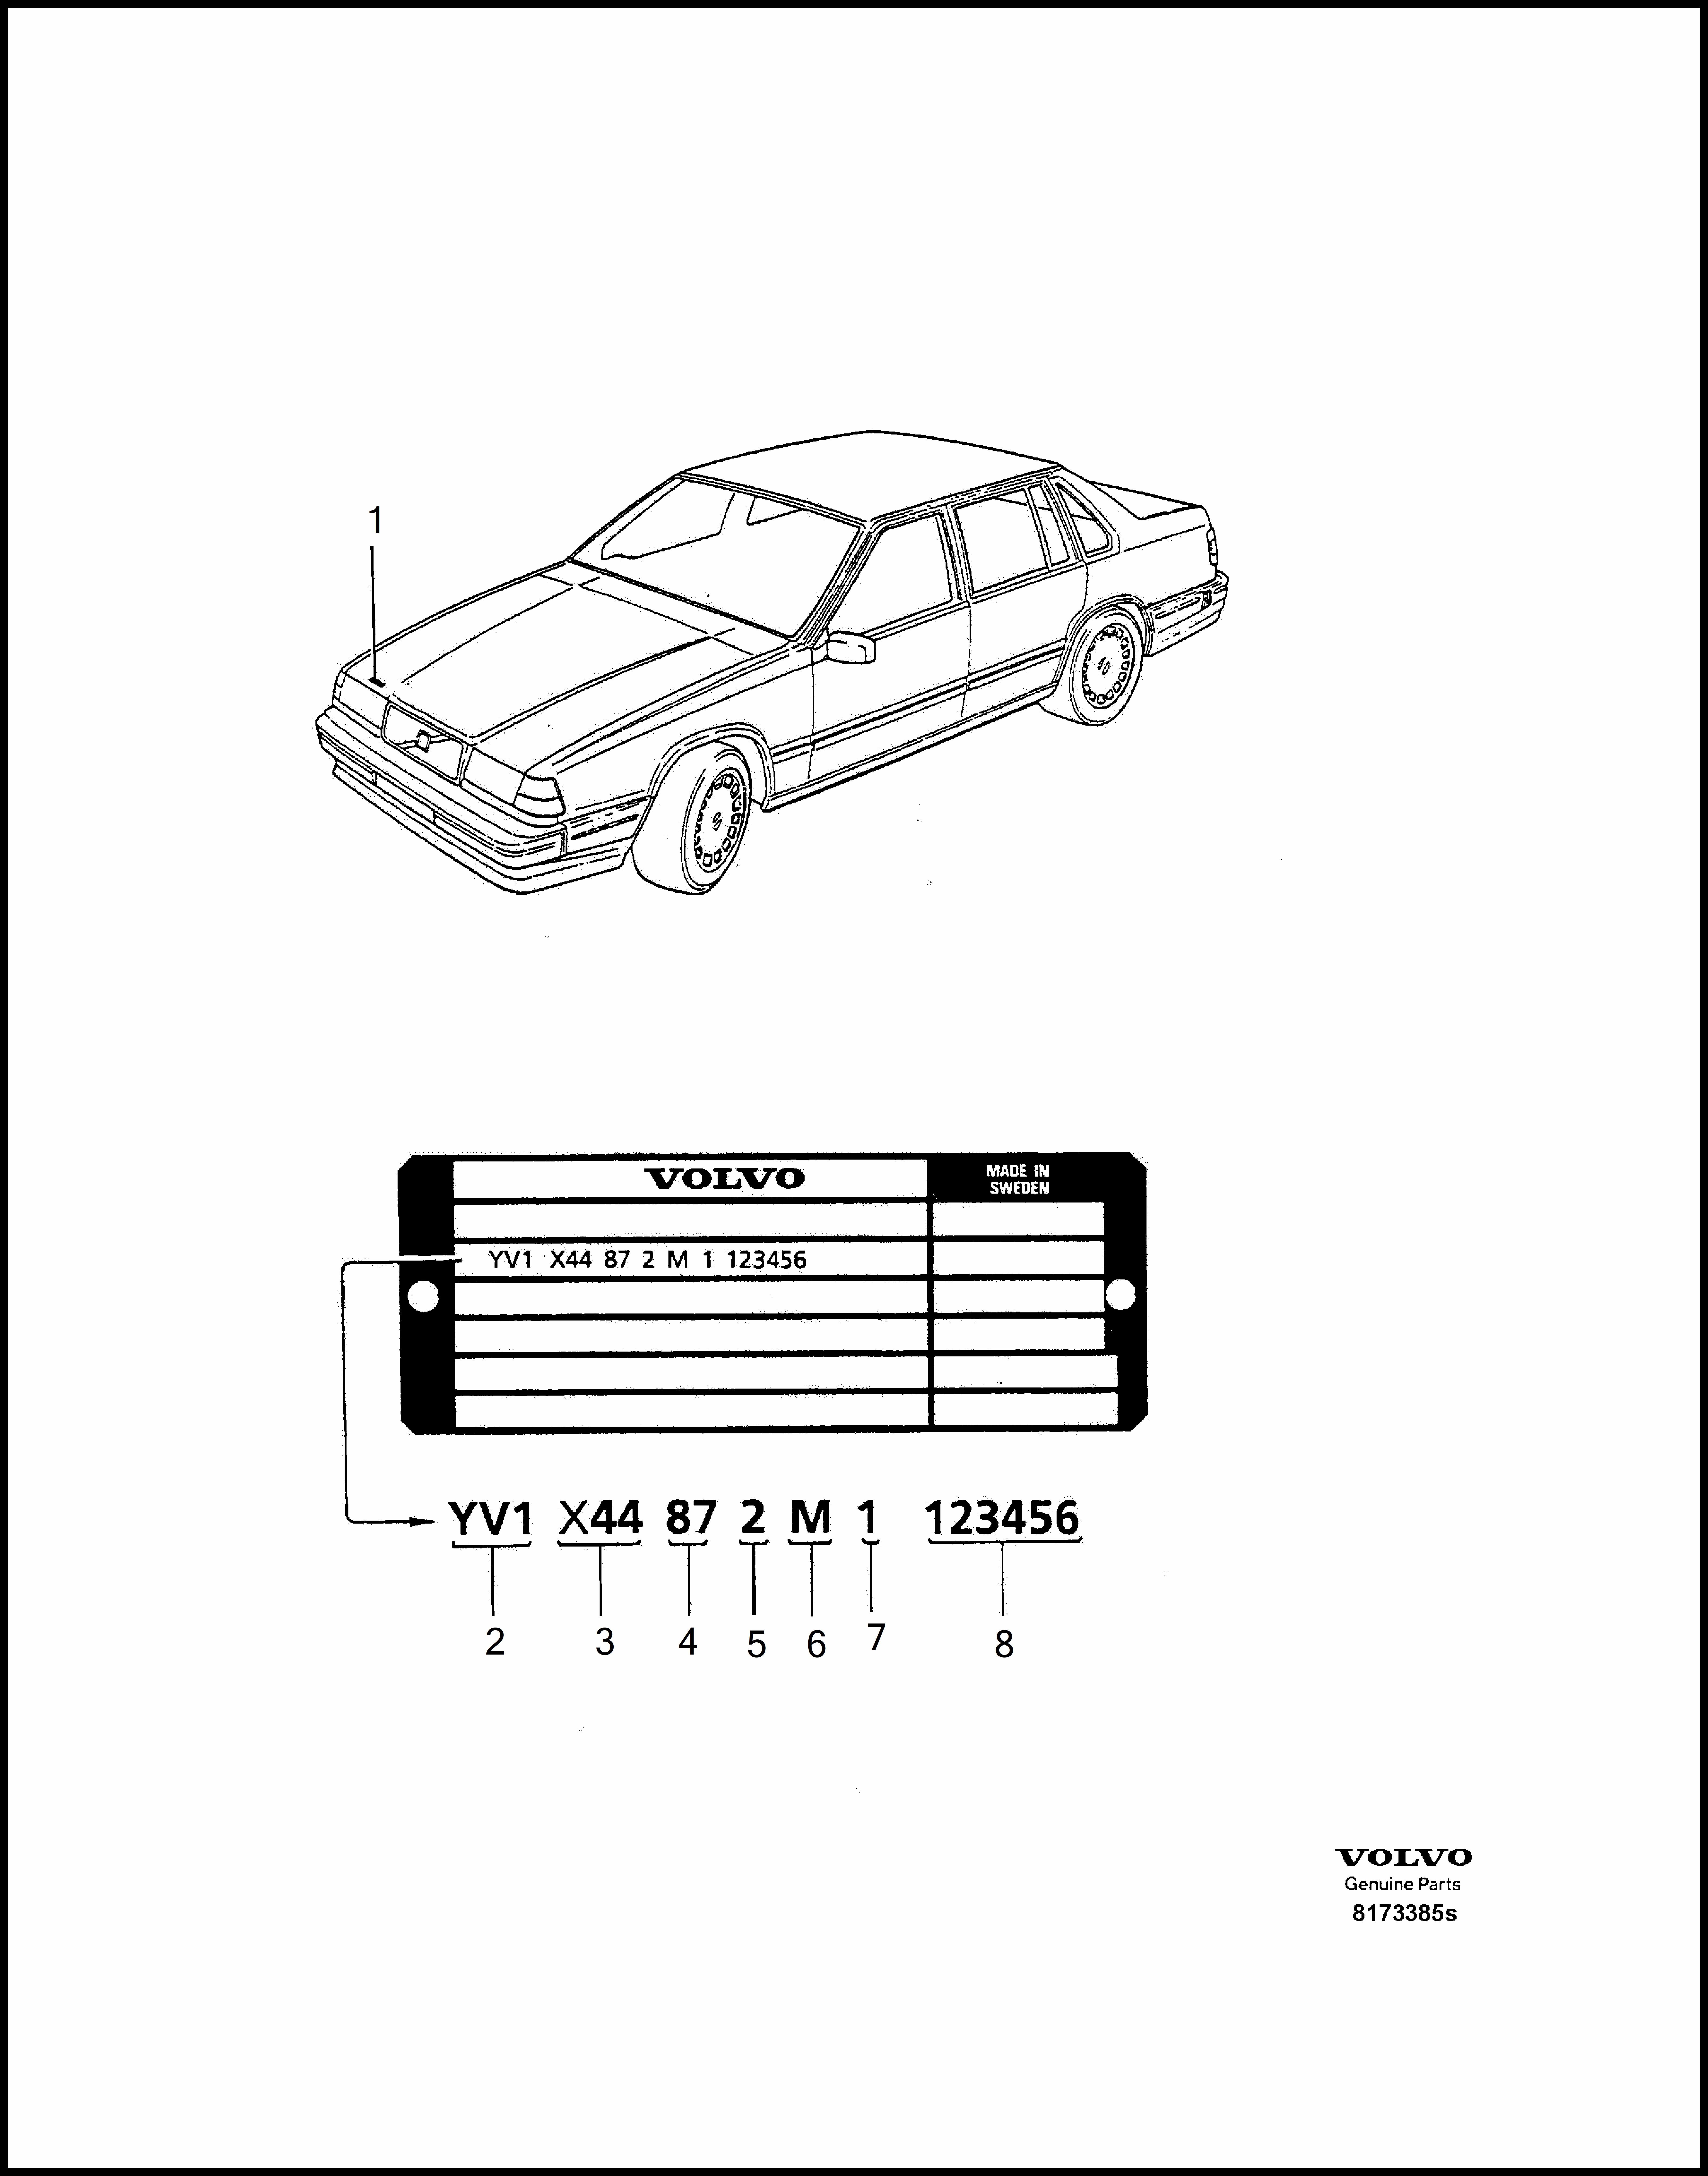 identification plate for Volvo 960 960